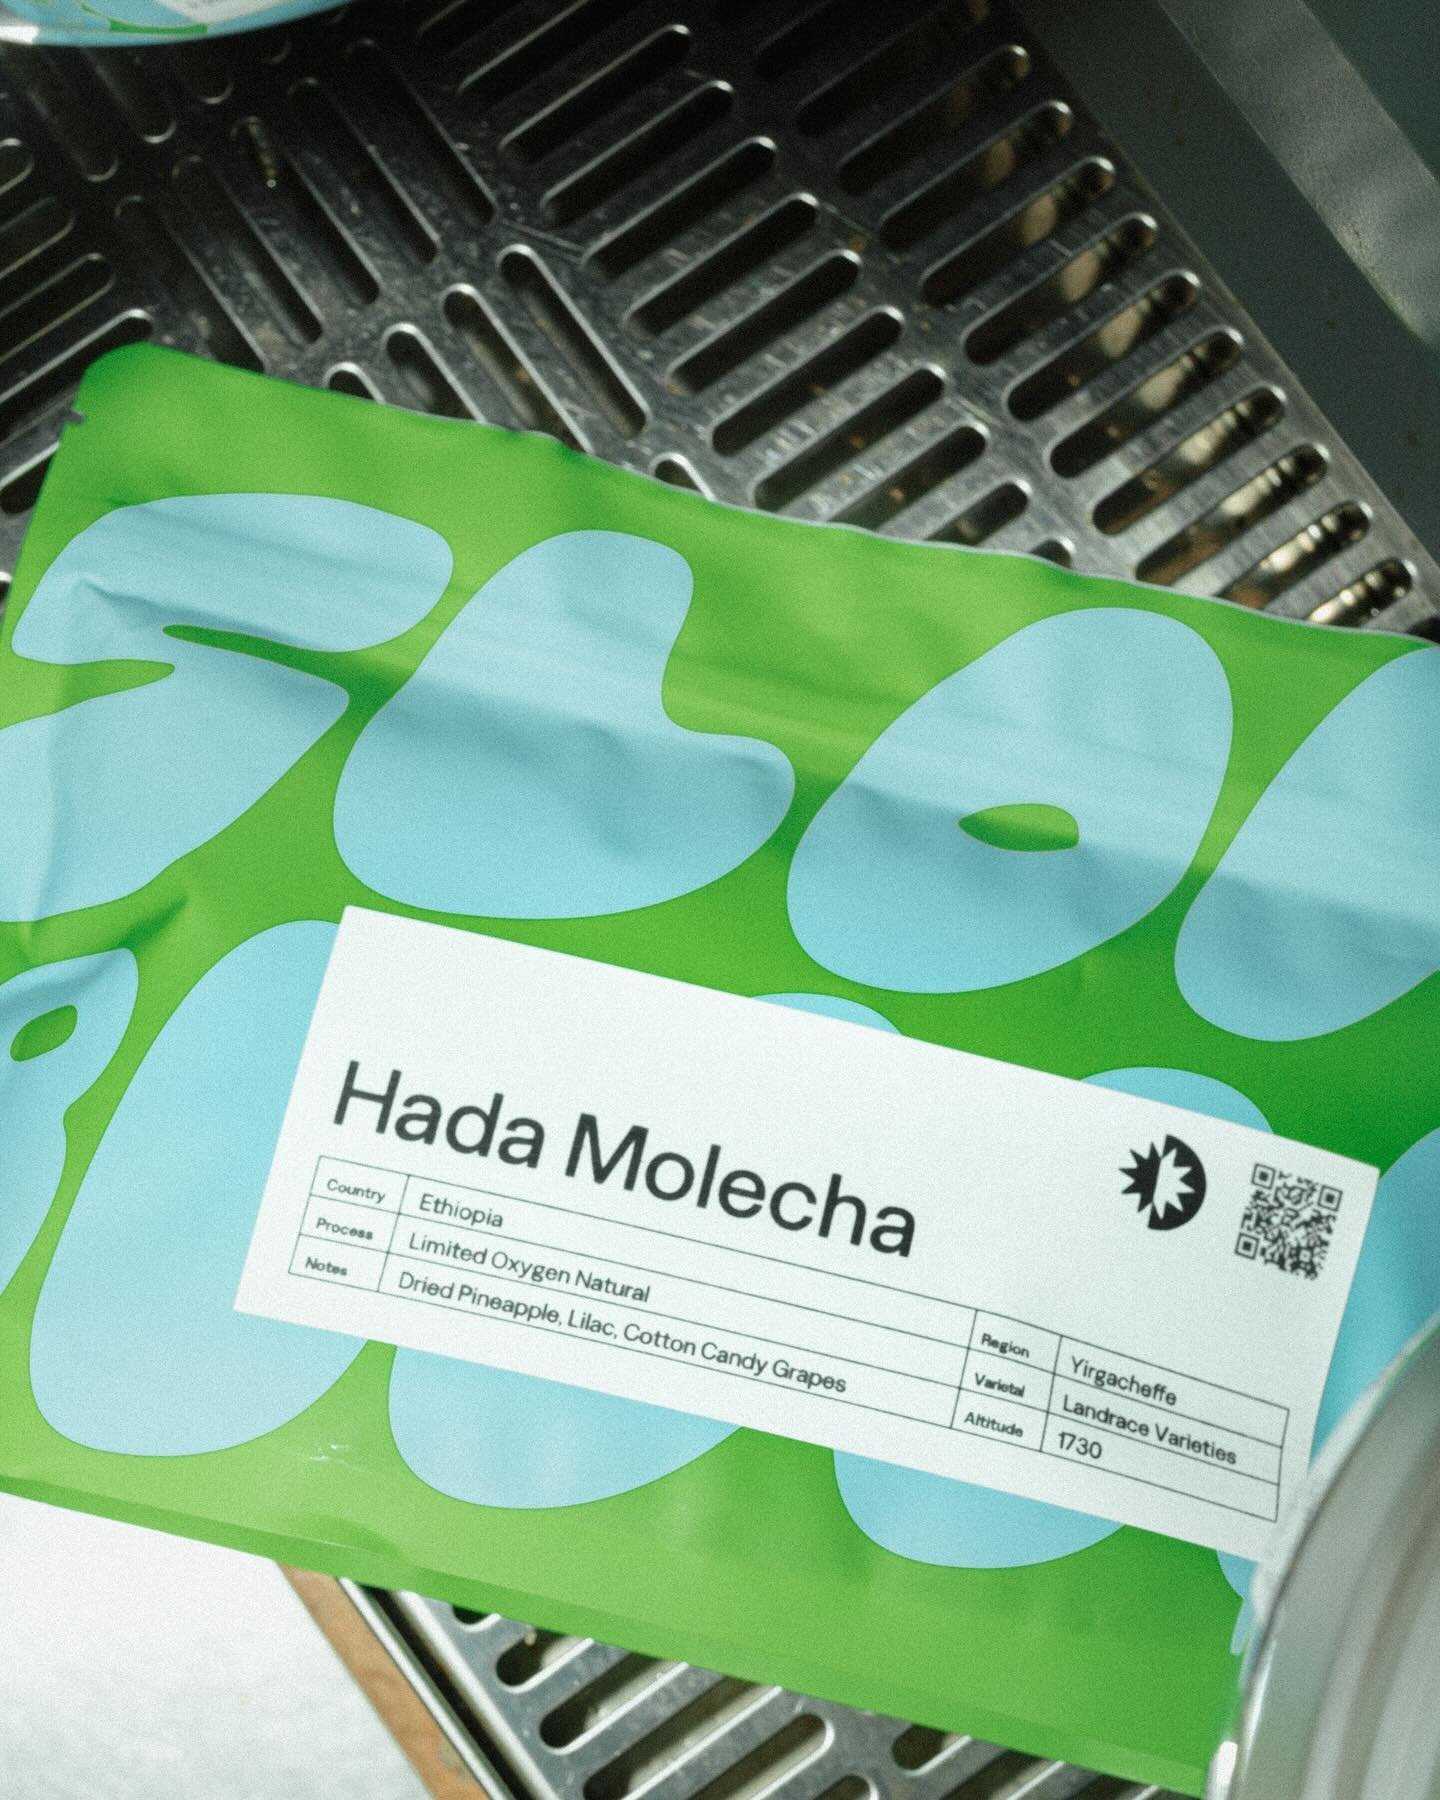 HADA MOLECHA🍍🍇💐
&bull;
Our love for natural Ethiopian coffees runs deep, and this limited oxygen coffee from the Hada Molecha site in Aricha is one of the most exciting coffees we have come across. 

After undergoing a limited oxygen fermentation 